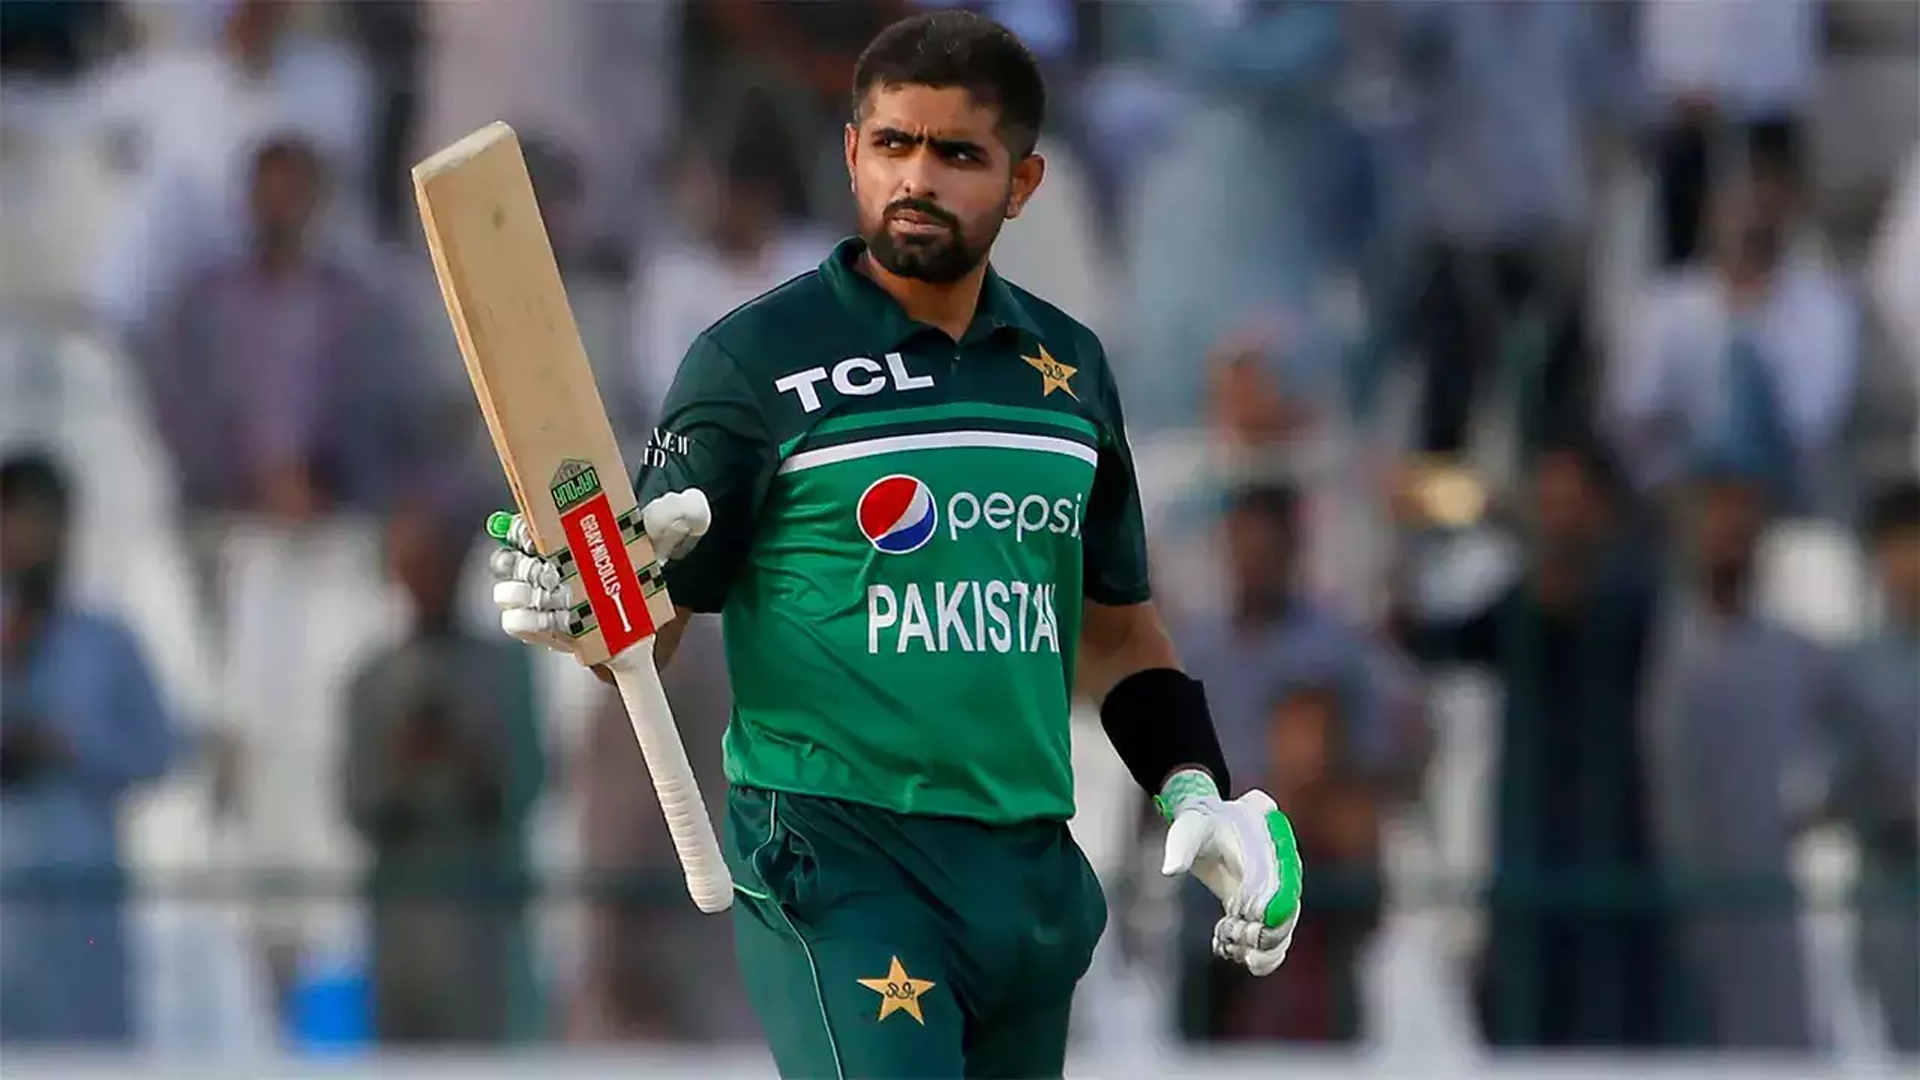 Let's Take A Look At Babar Azam Career Record, Stats And Family Background  On His Birthday